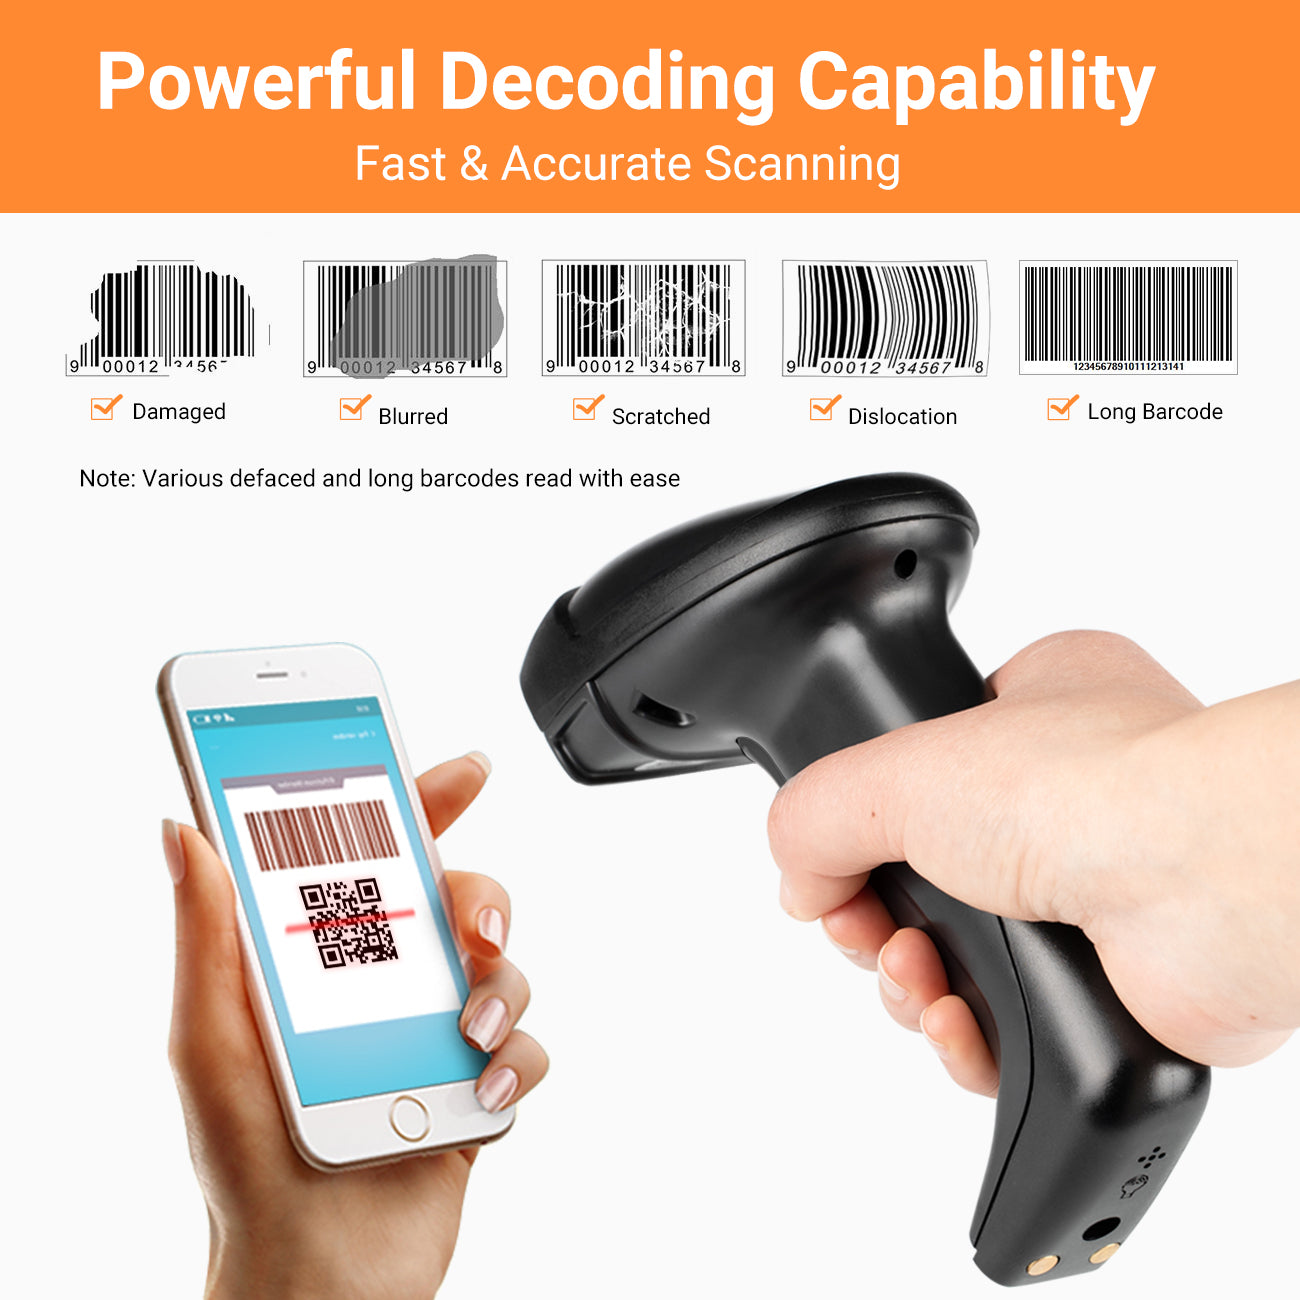 tera-hw0005-2d-wireless-barcode-scanner-powerful-decoding-capability